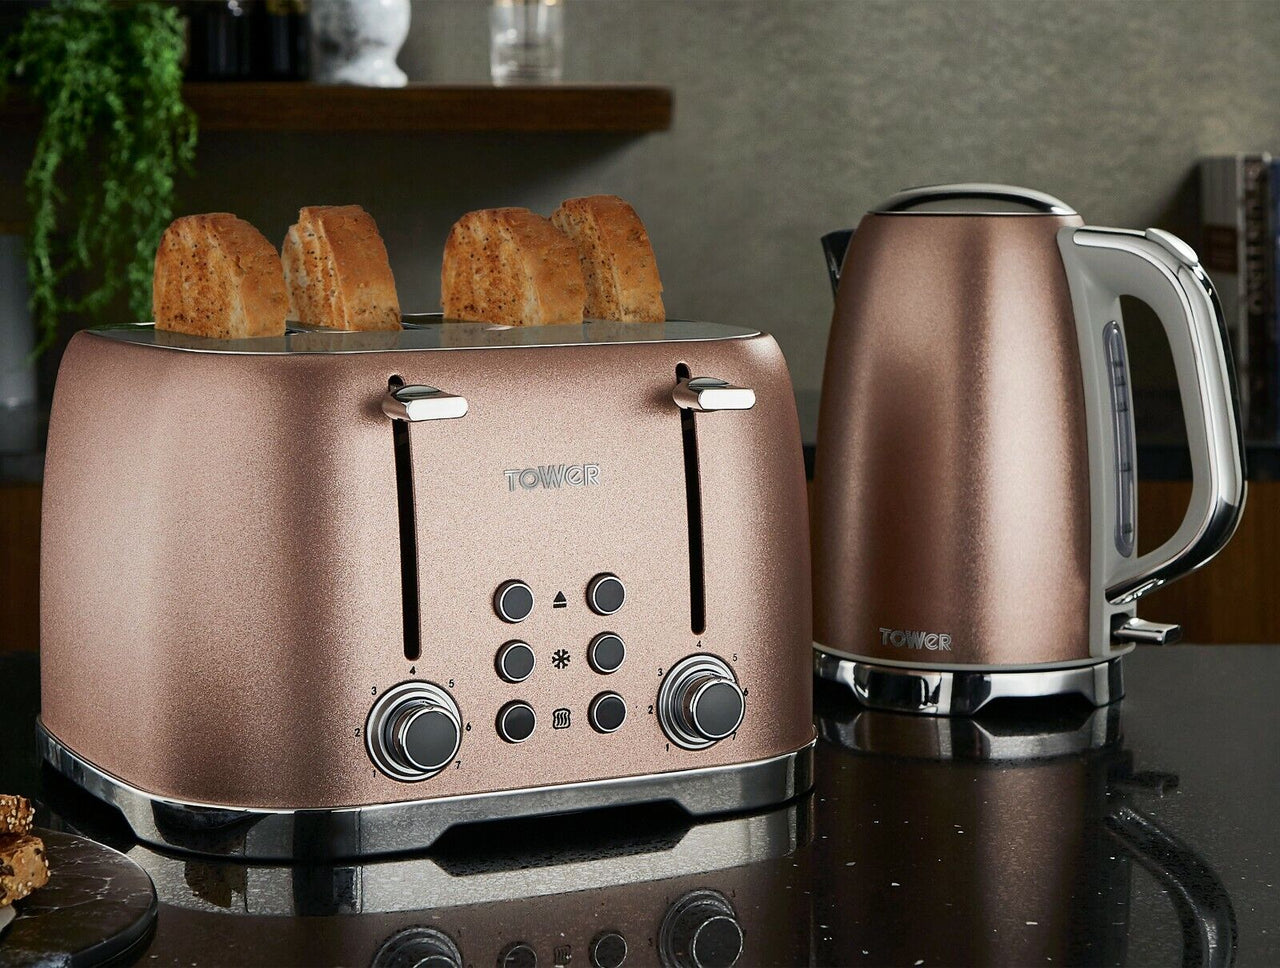 Tower Glitz Blush Pink Kettle 4 Slice Toaster 3 Canisters Bread bin Matching Set